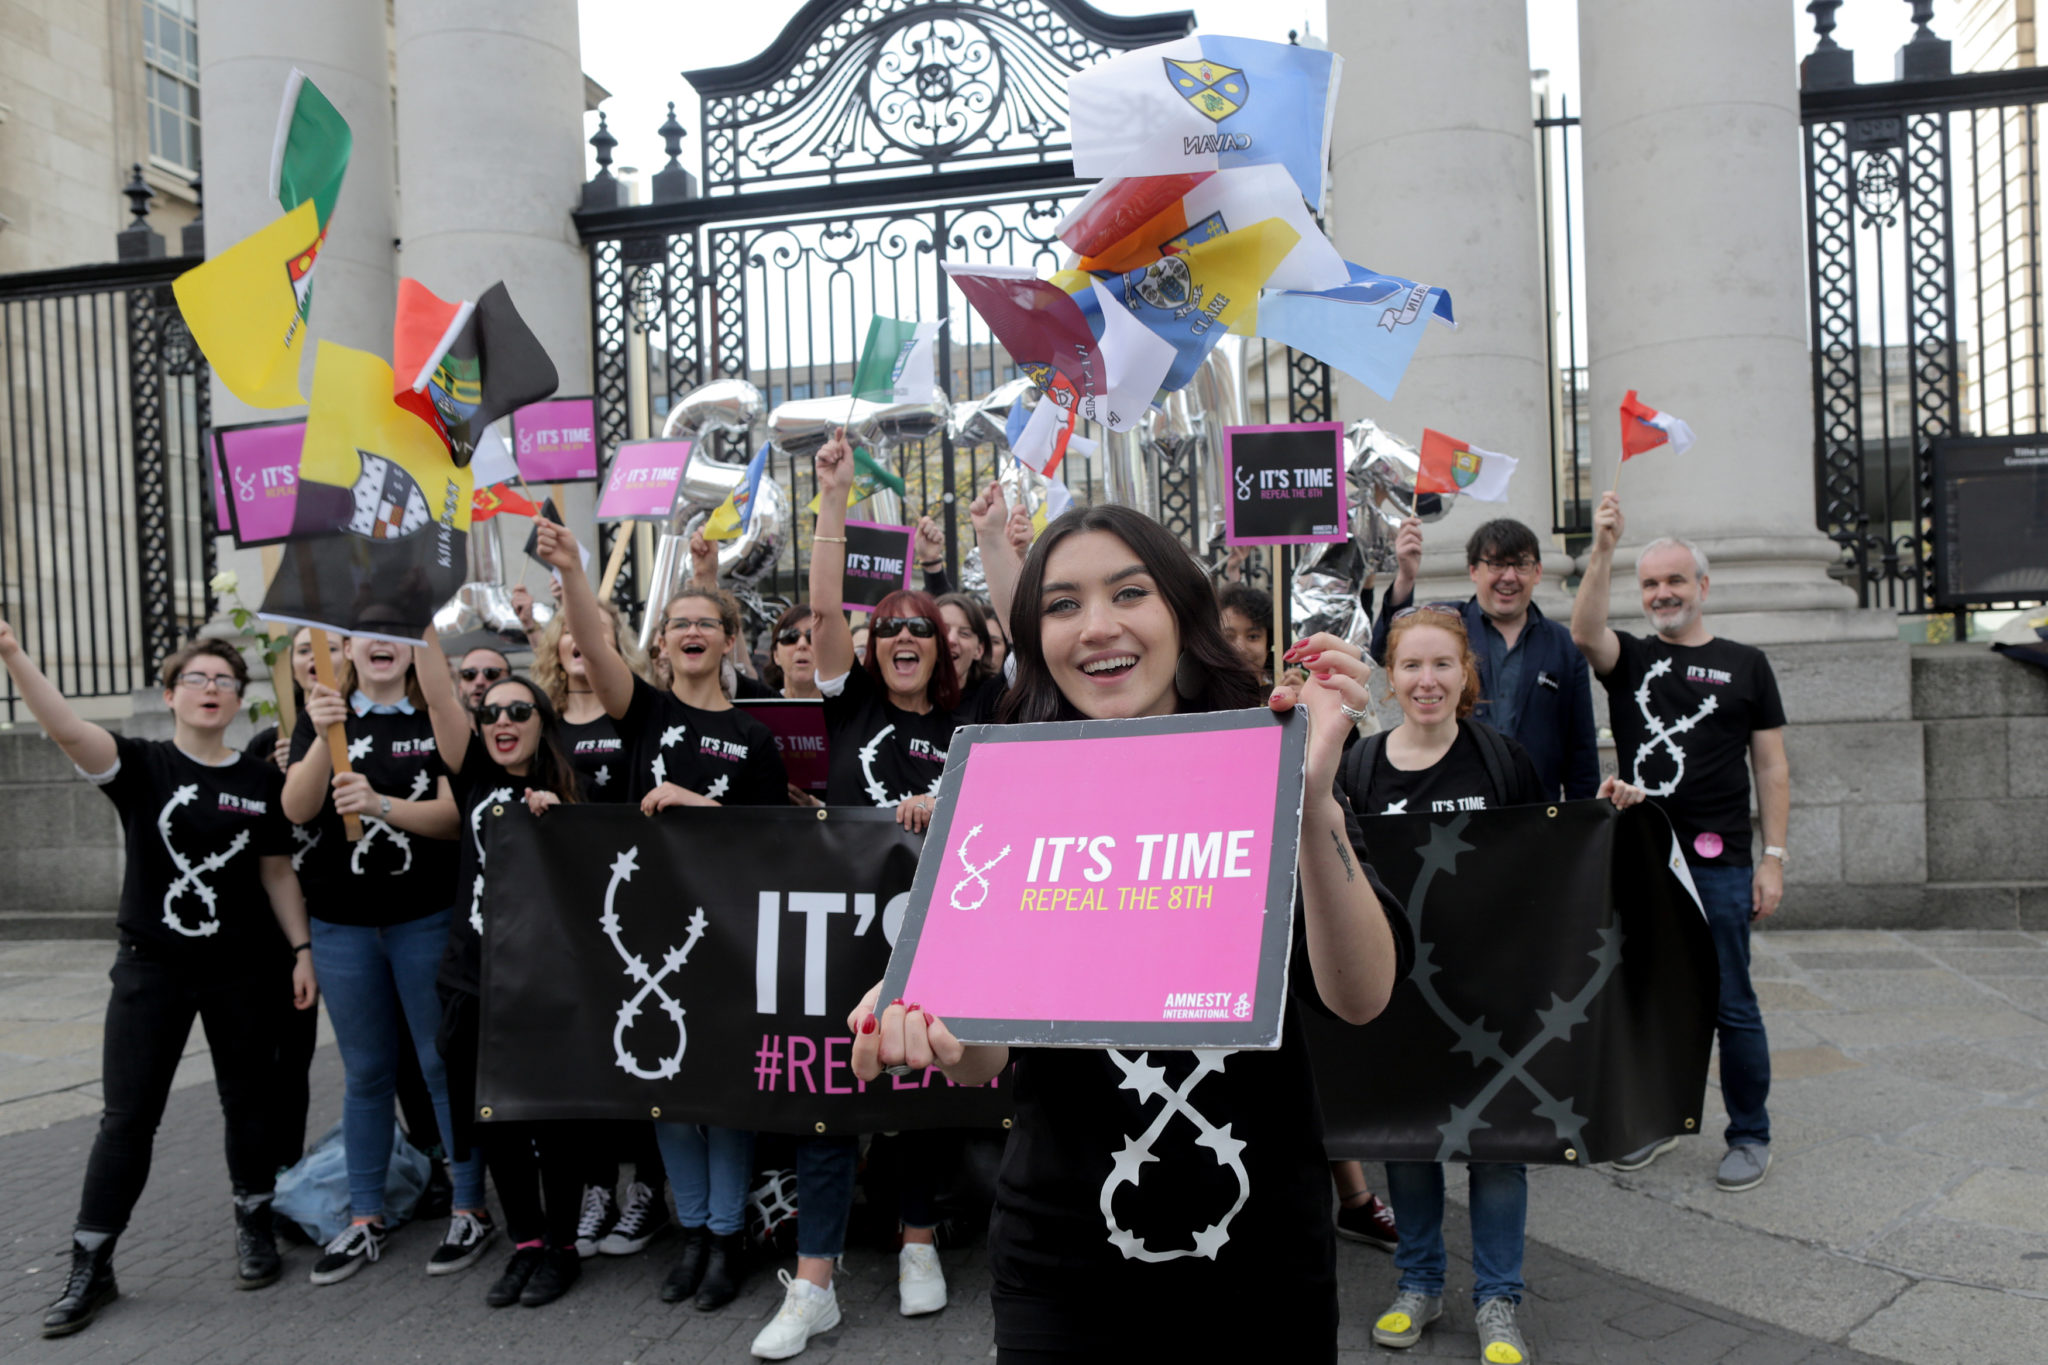 Ireland says Yes to women’s reproductive rights